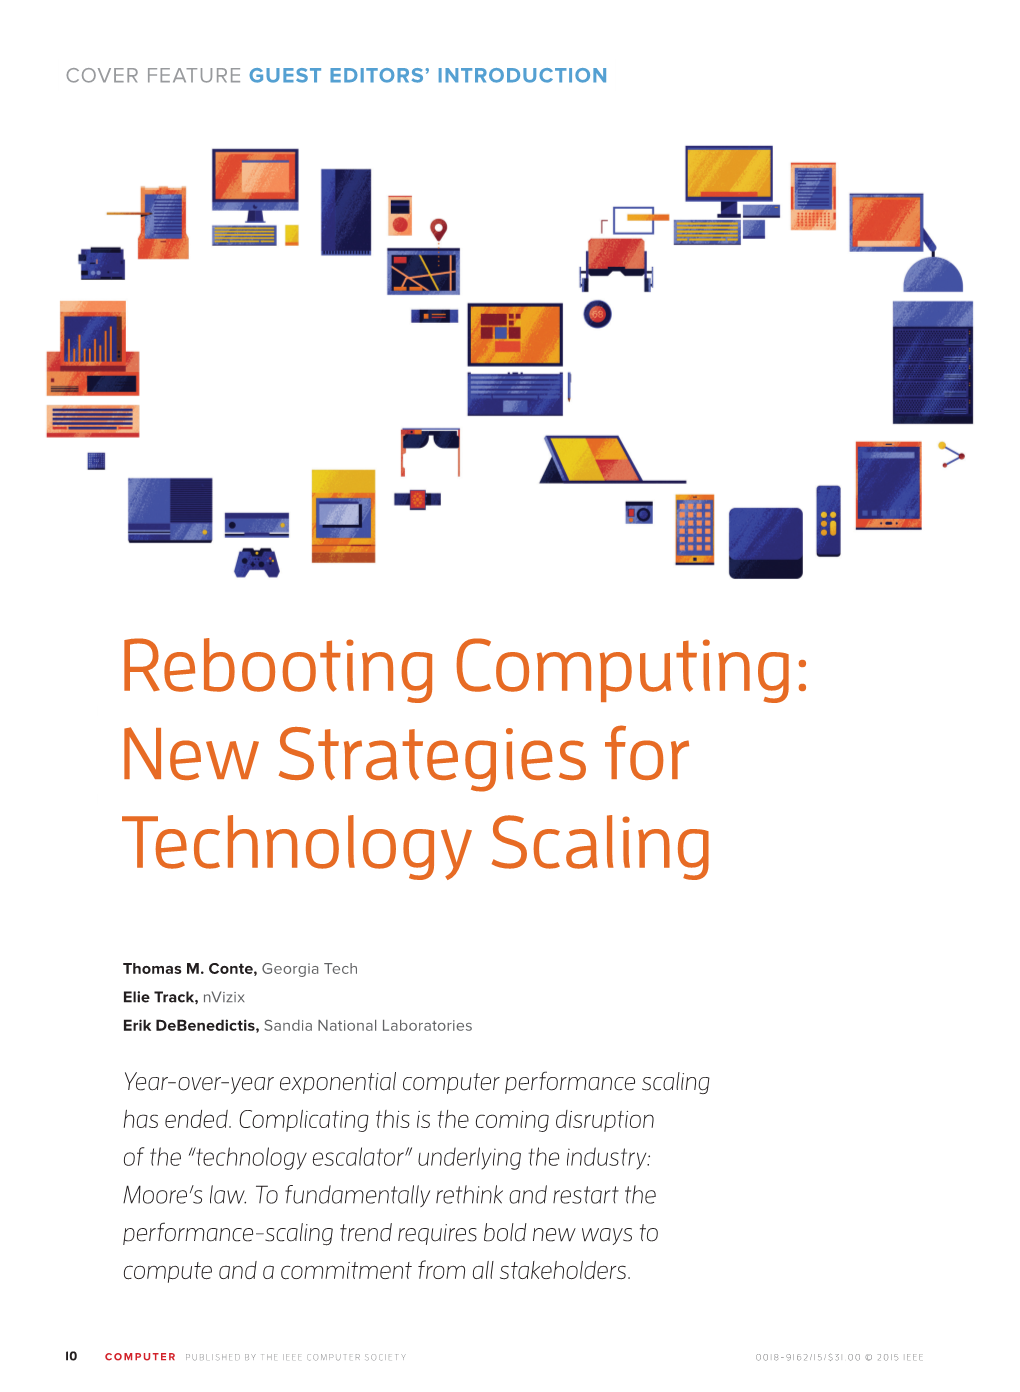 Rebooting Computing: New Strategies for Technology Scaling